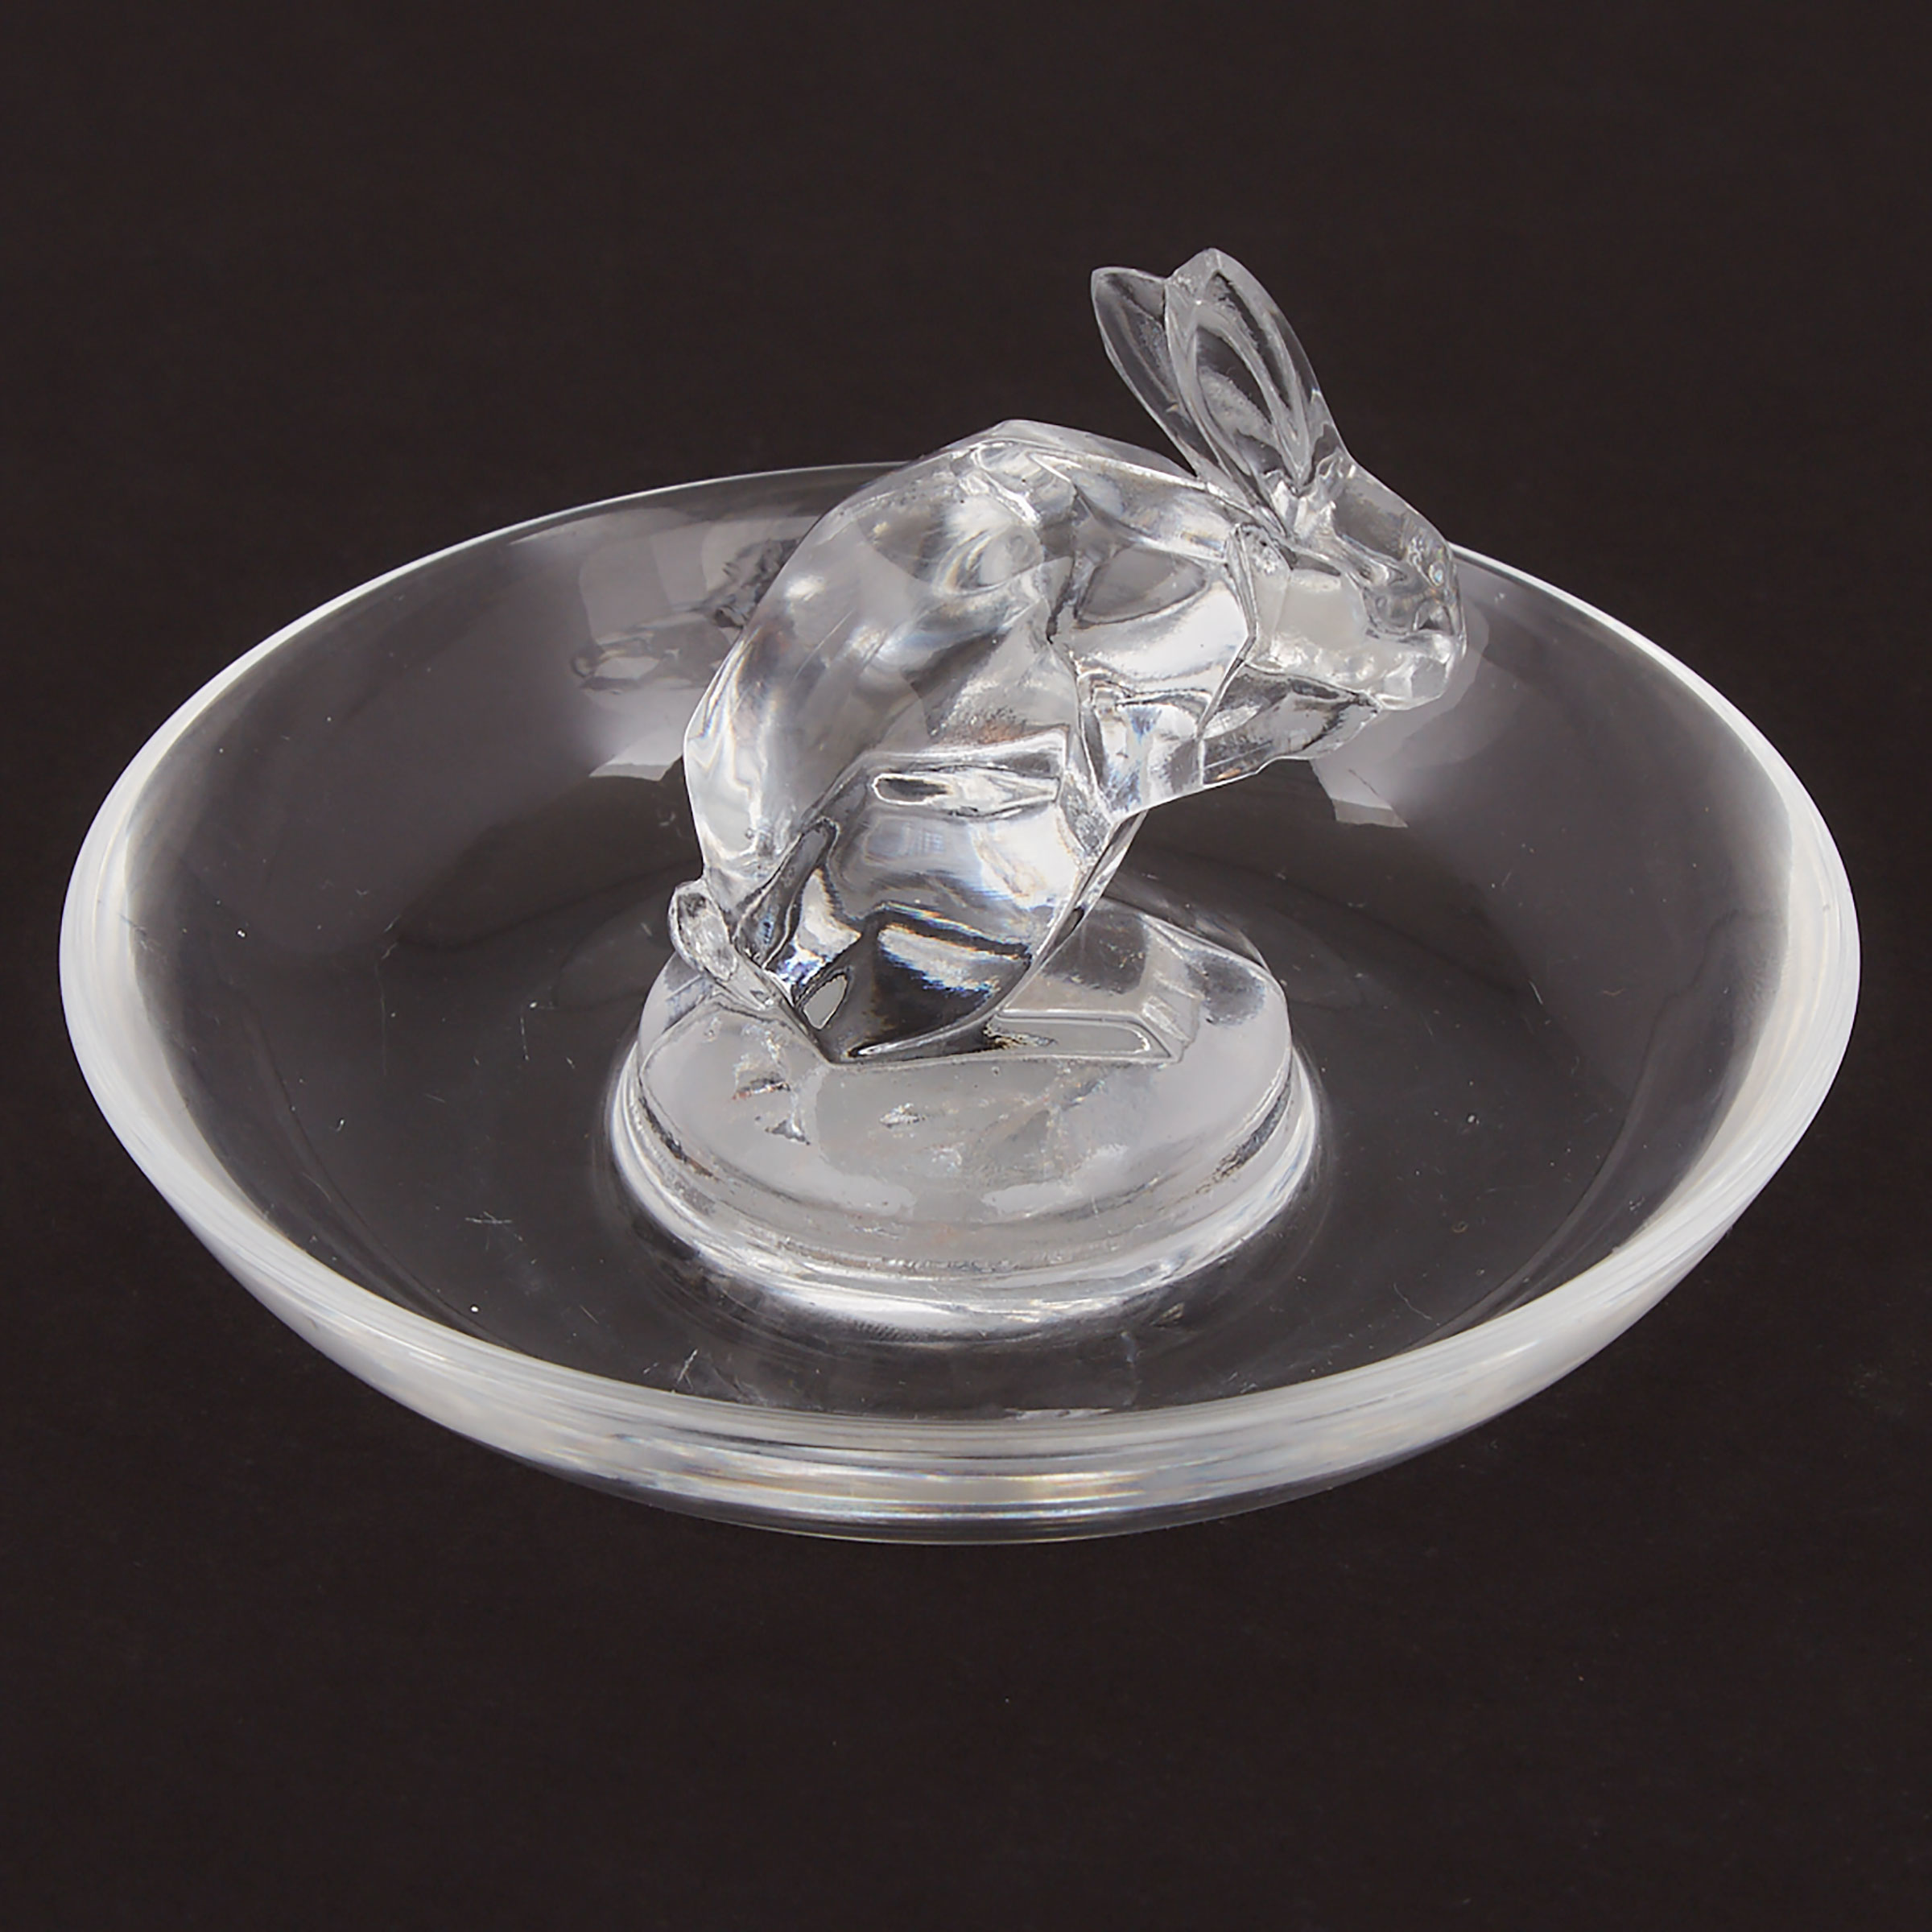 ‘Lapin’, Lalique Moulded Glass Cendrier, 1930s